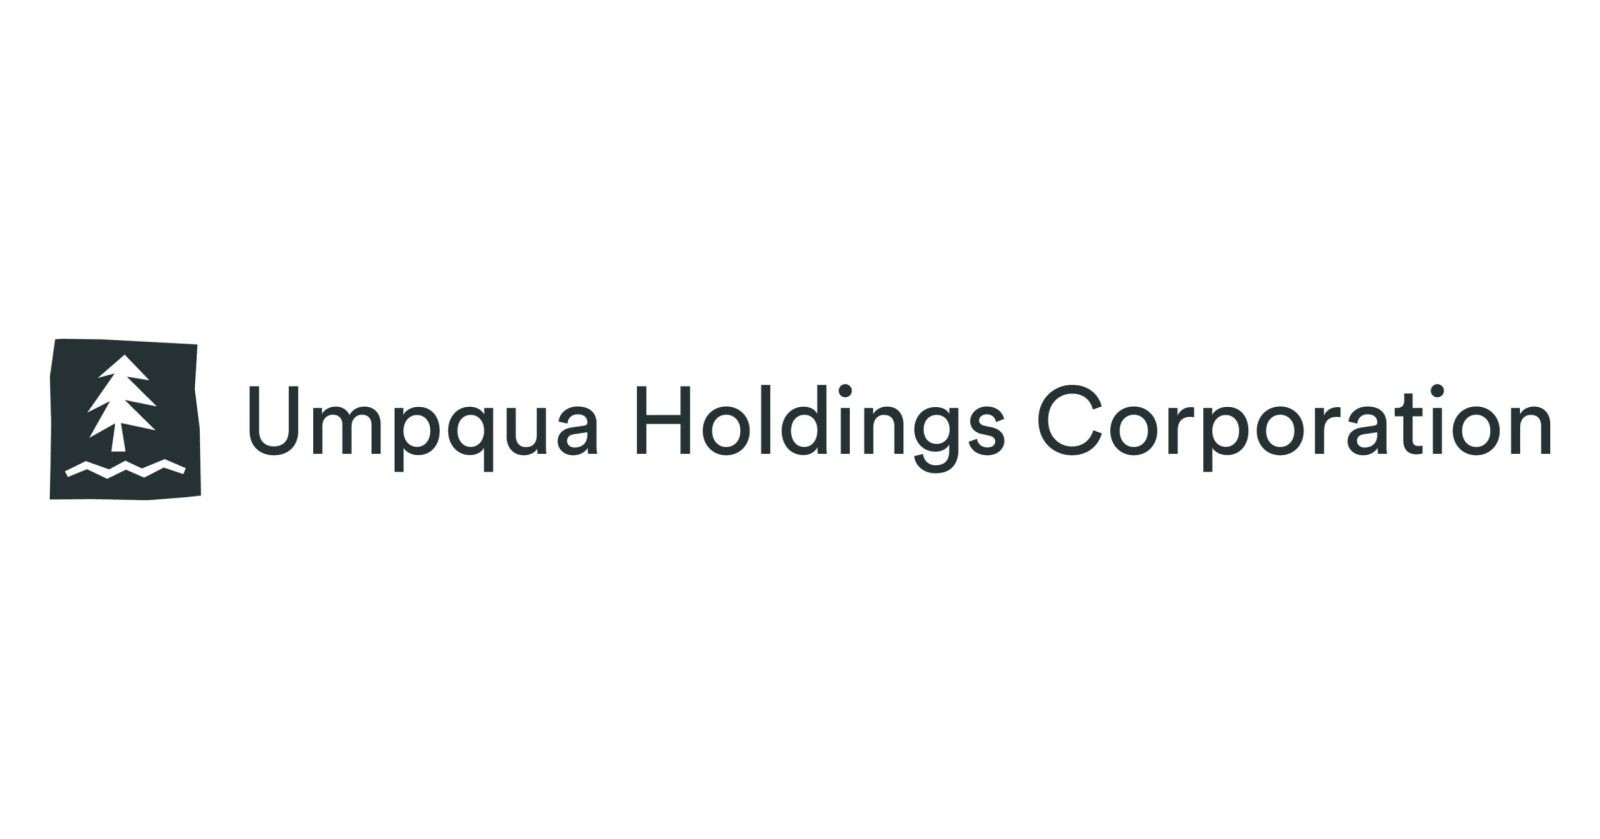 Columbia Banking System and Umpqua Holdings Corporation Announce FDIC Approval and Expected Closing Timeline for Combination